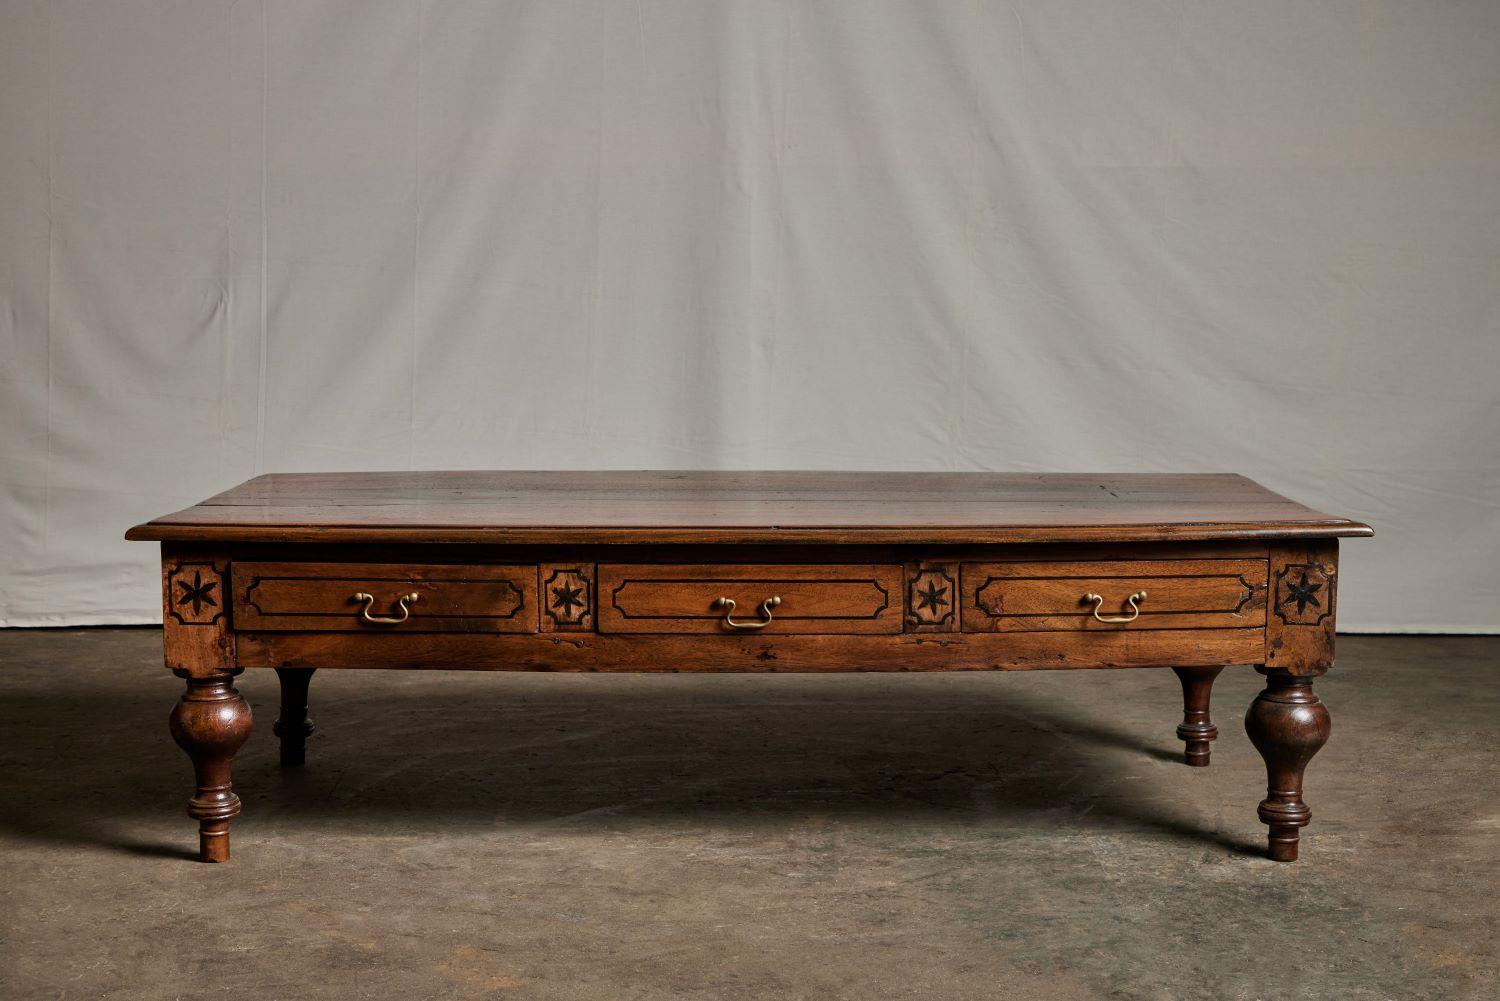 Sri Lankan coffee table with three Drawers and metal handles. Sides of drawers have intricate leaf carvings.